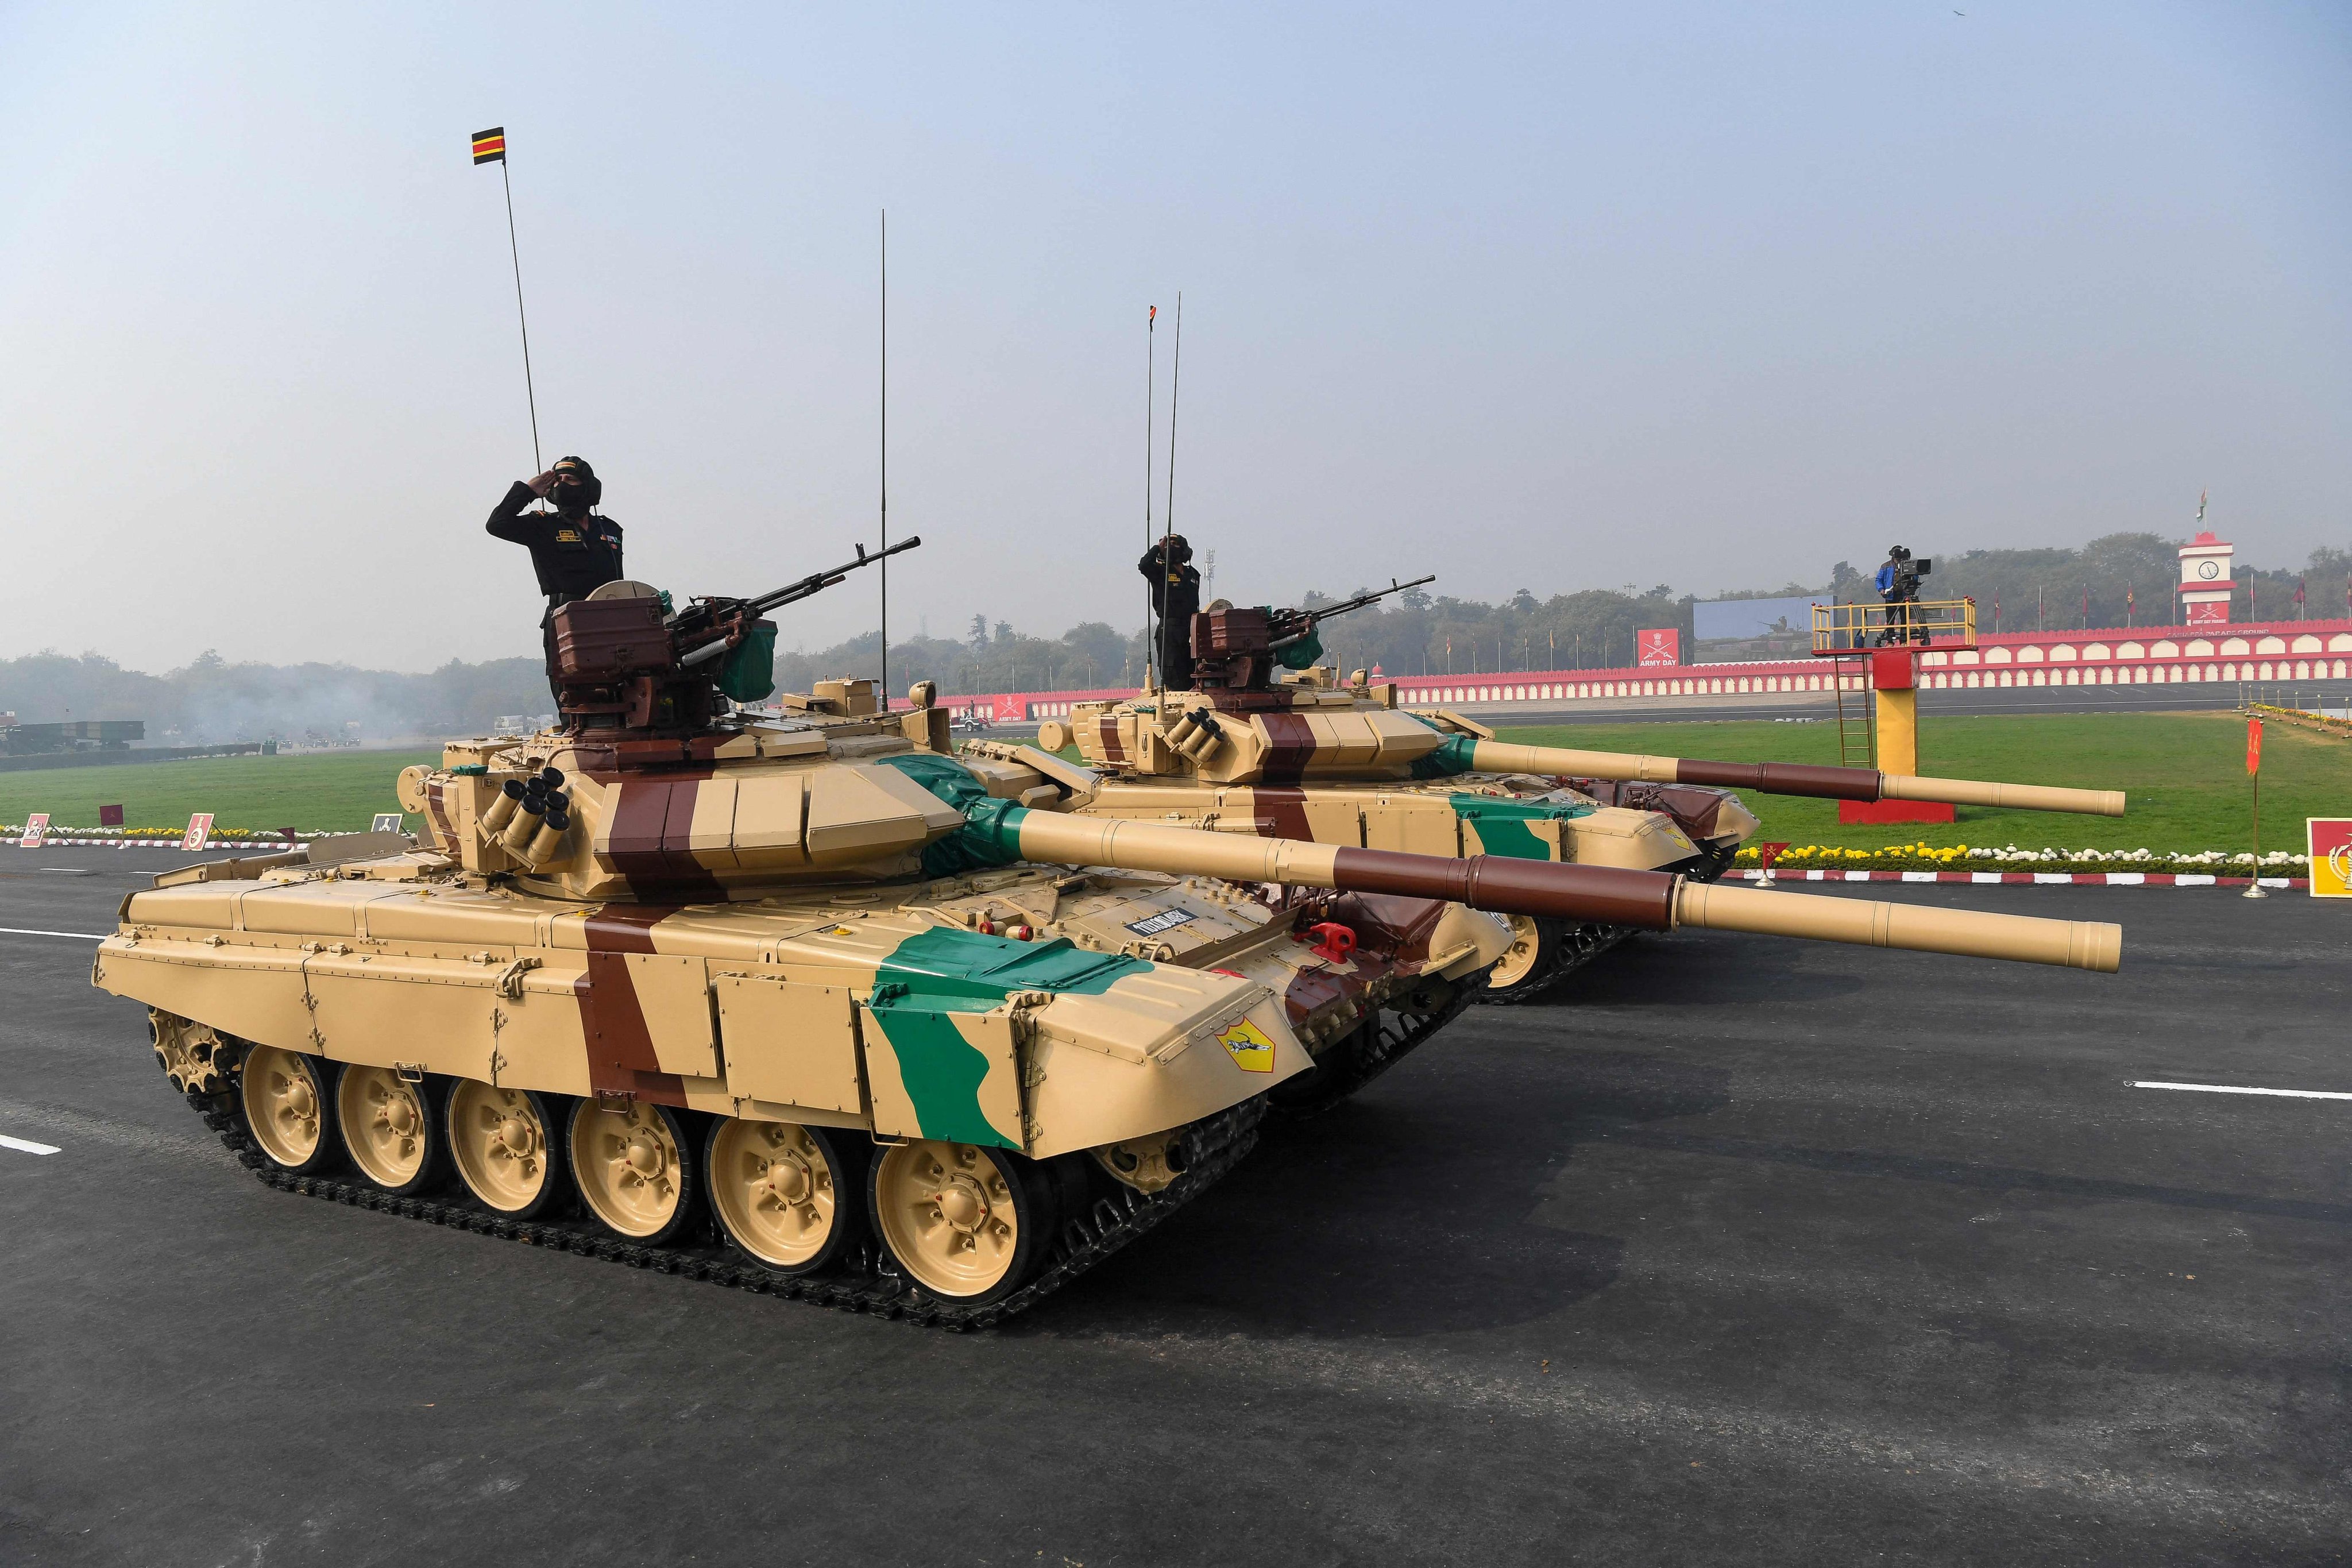 Soldiers in Russian-made T-90 tanks march past during a ceremony to celebrate India’s Army Day in New Delhi in January 2021. India’s ties with Russia go back decades. Photo: AFP